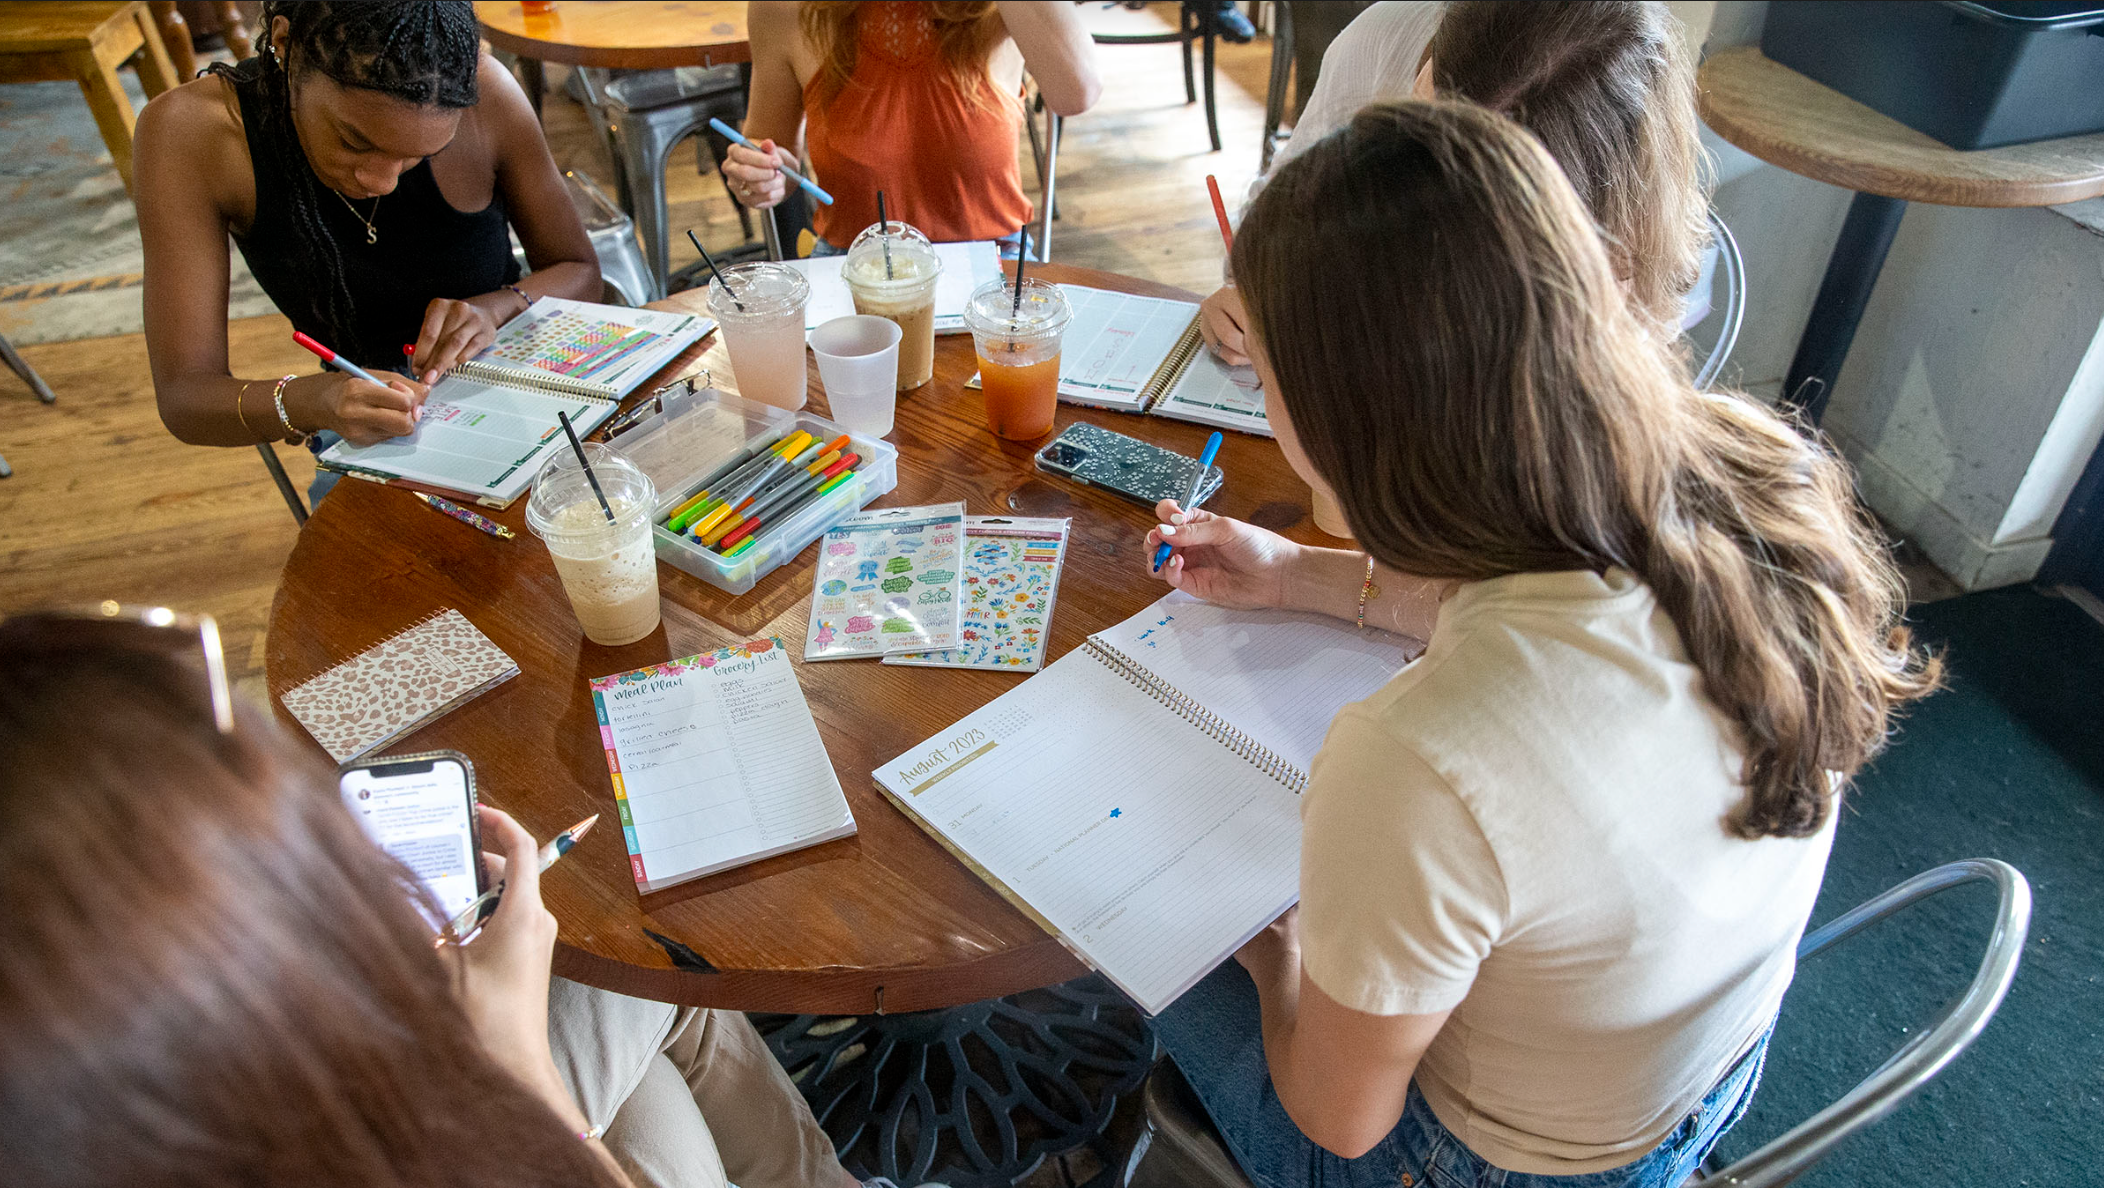 A group of women sitting at a coffee shop planning together